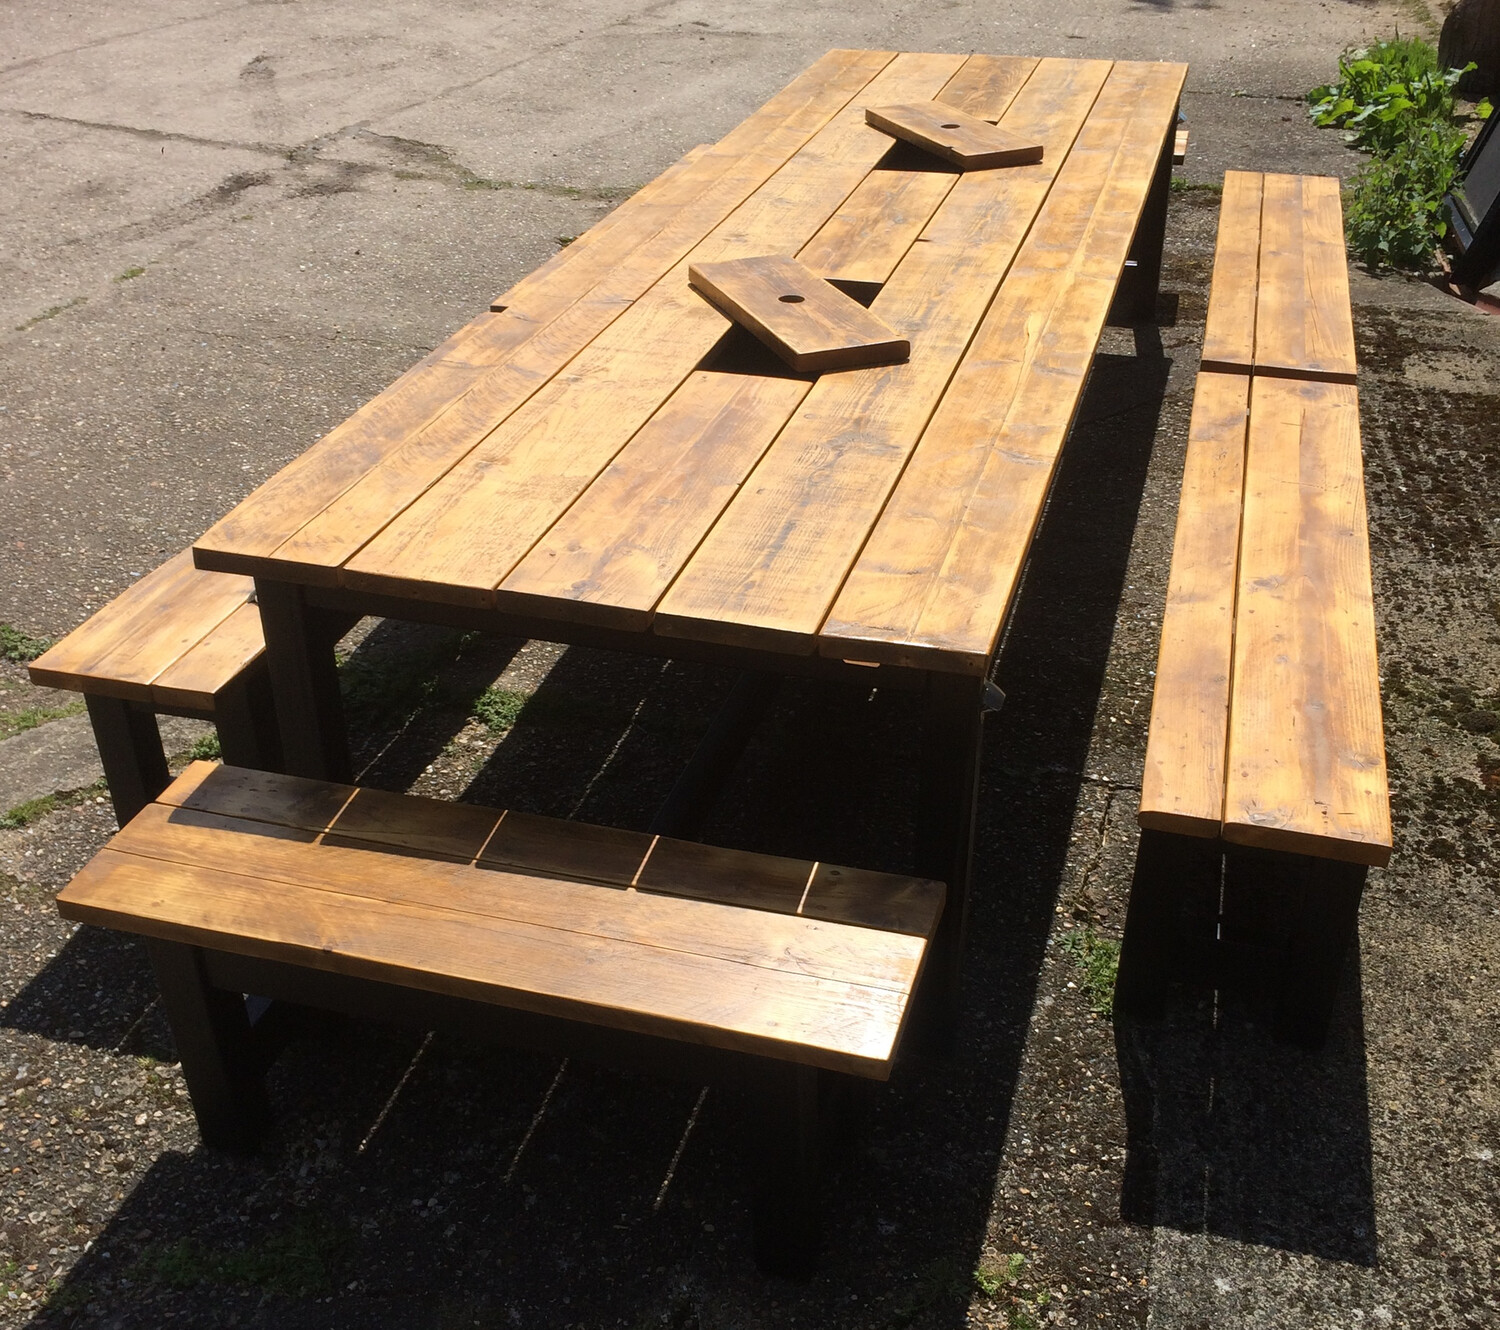 Prosecco Banqueting Patio Table, 4 Half Benches & 2 End Benches